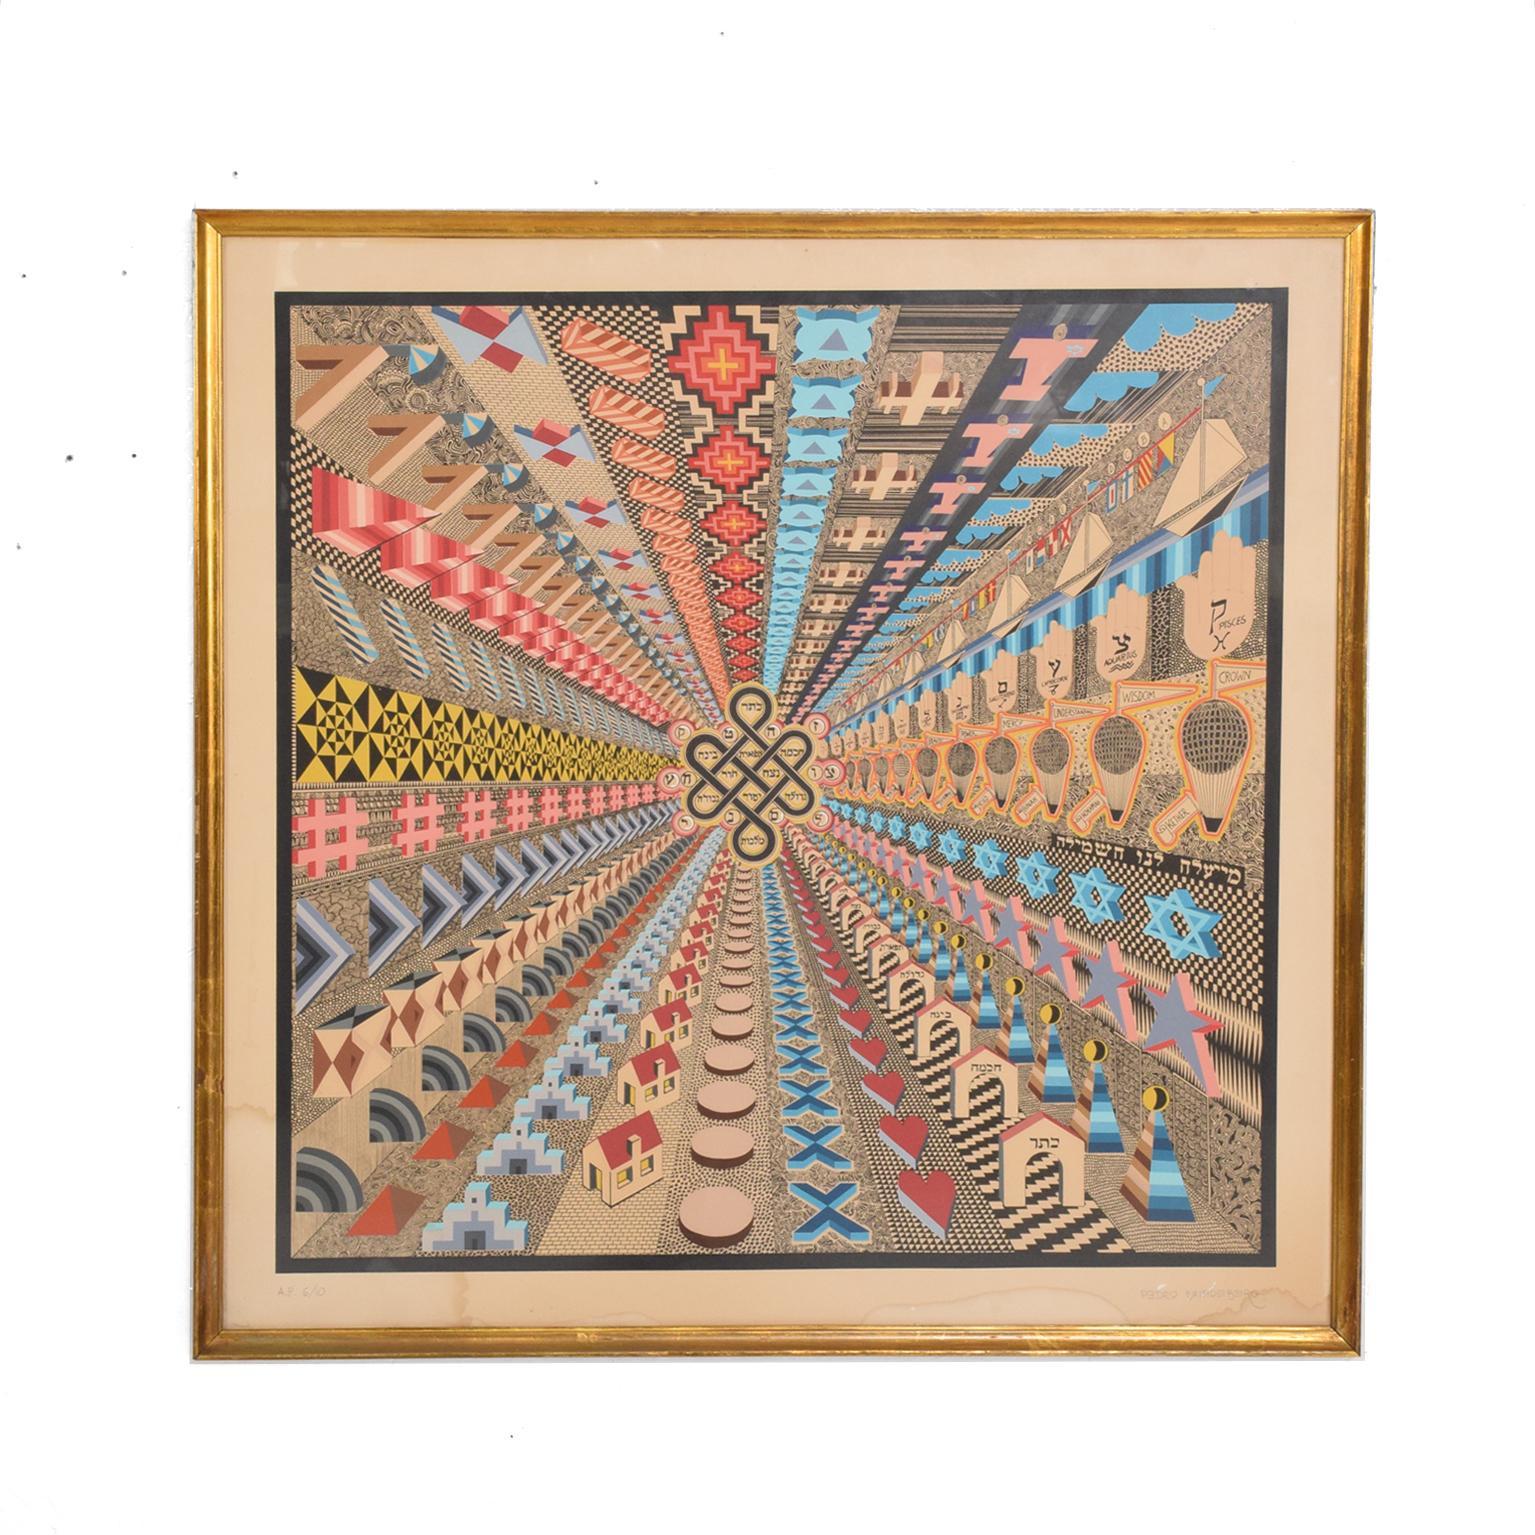 1970s Abstract Op Art Lithograph by Pedro Friedeberg A P 6/10 Midcentury Mexico
Bright colors bold patterns provide illusion and fantasy.
Original Wood Frame with Gold Leaf. Signed in pencil.
Original Unrestored Vintage Condition. 
Imperfections